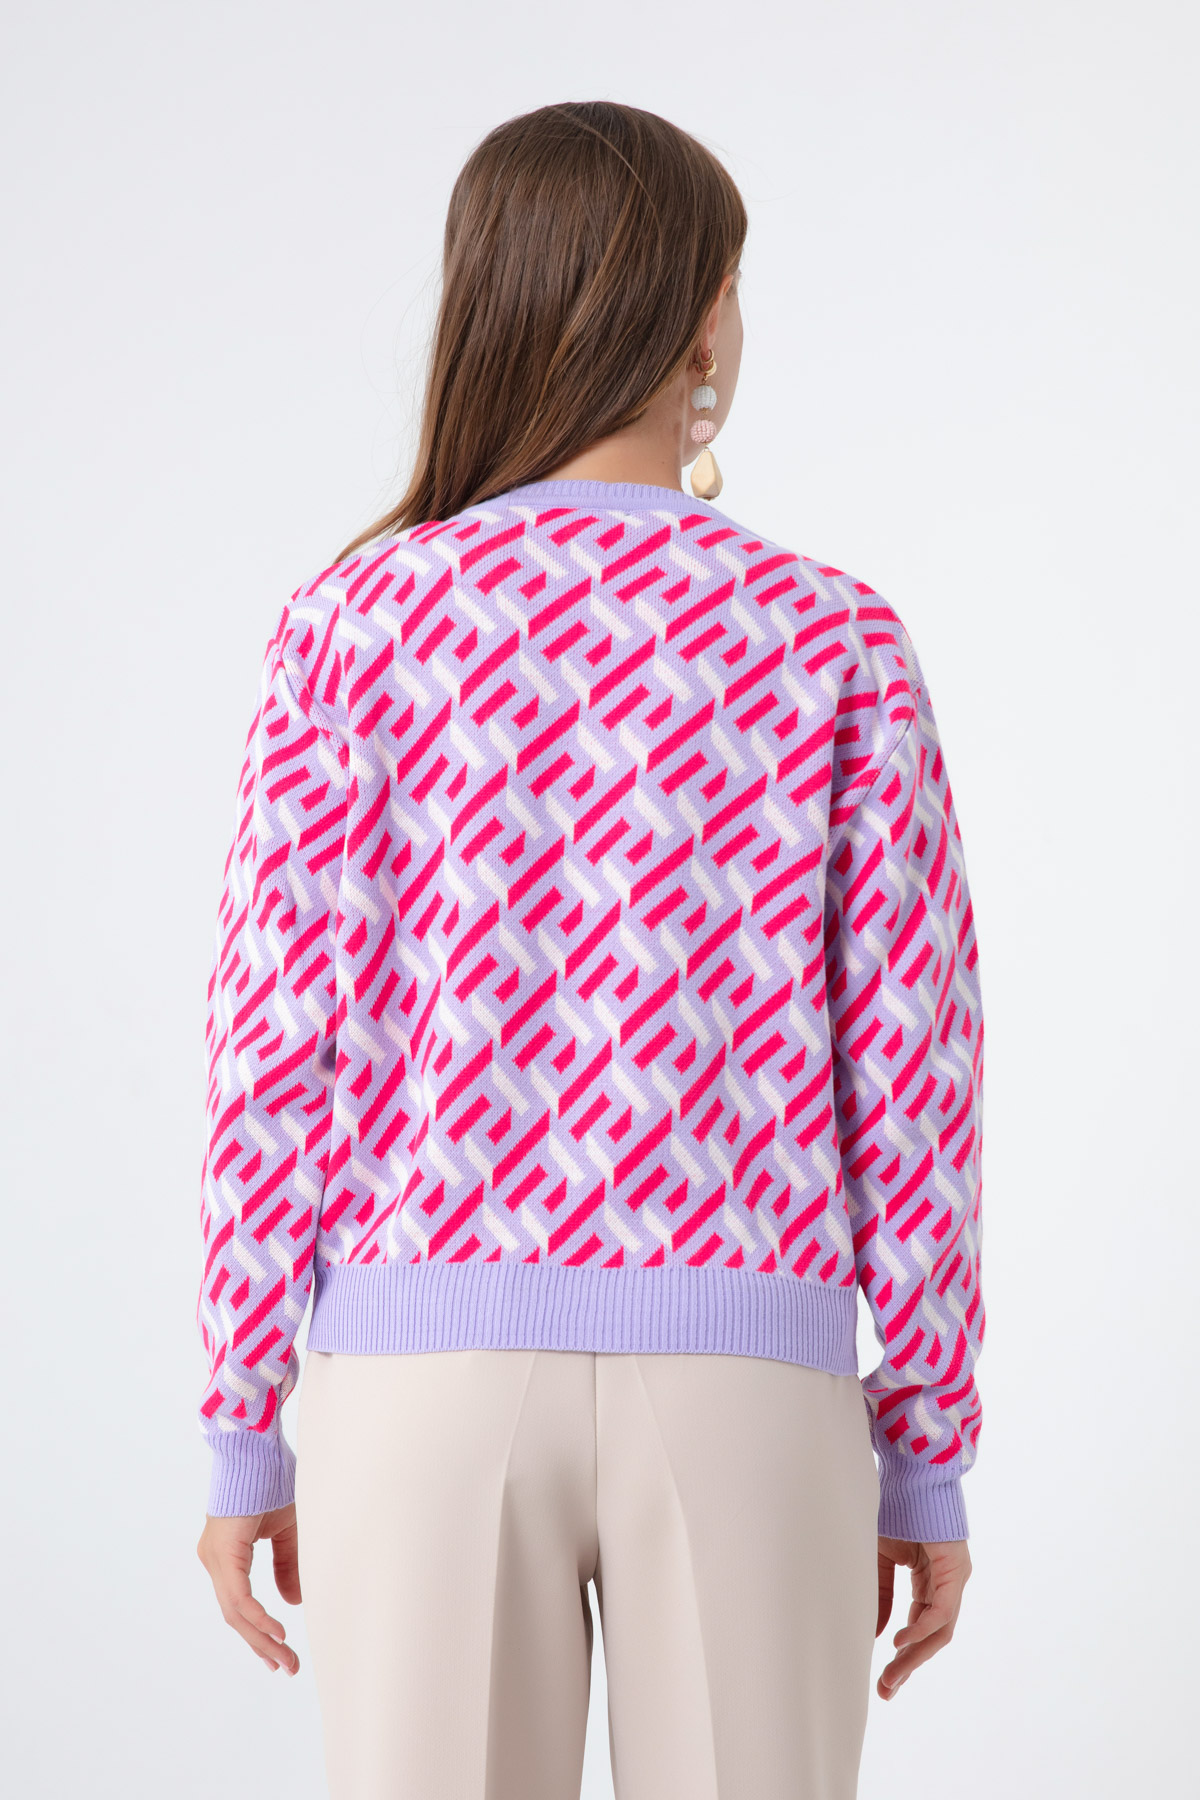 Women's Lilac Patterned Sweater